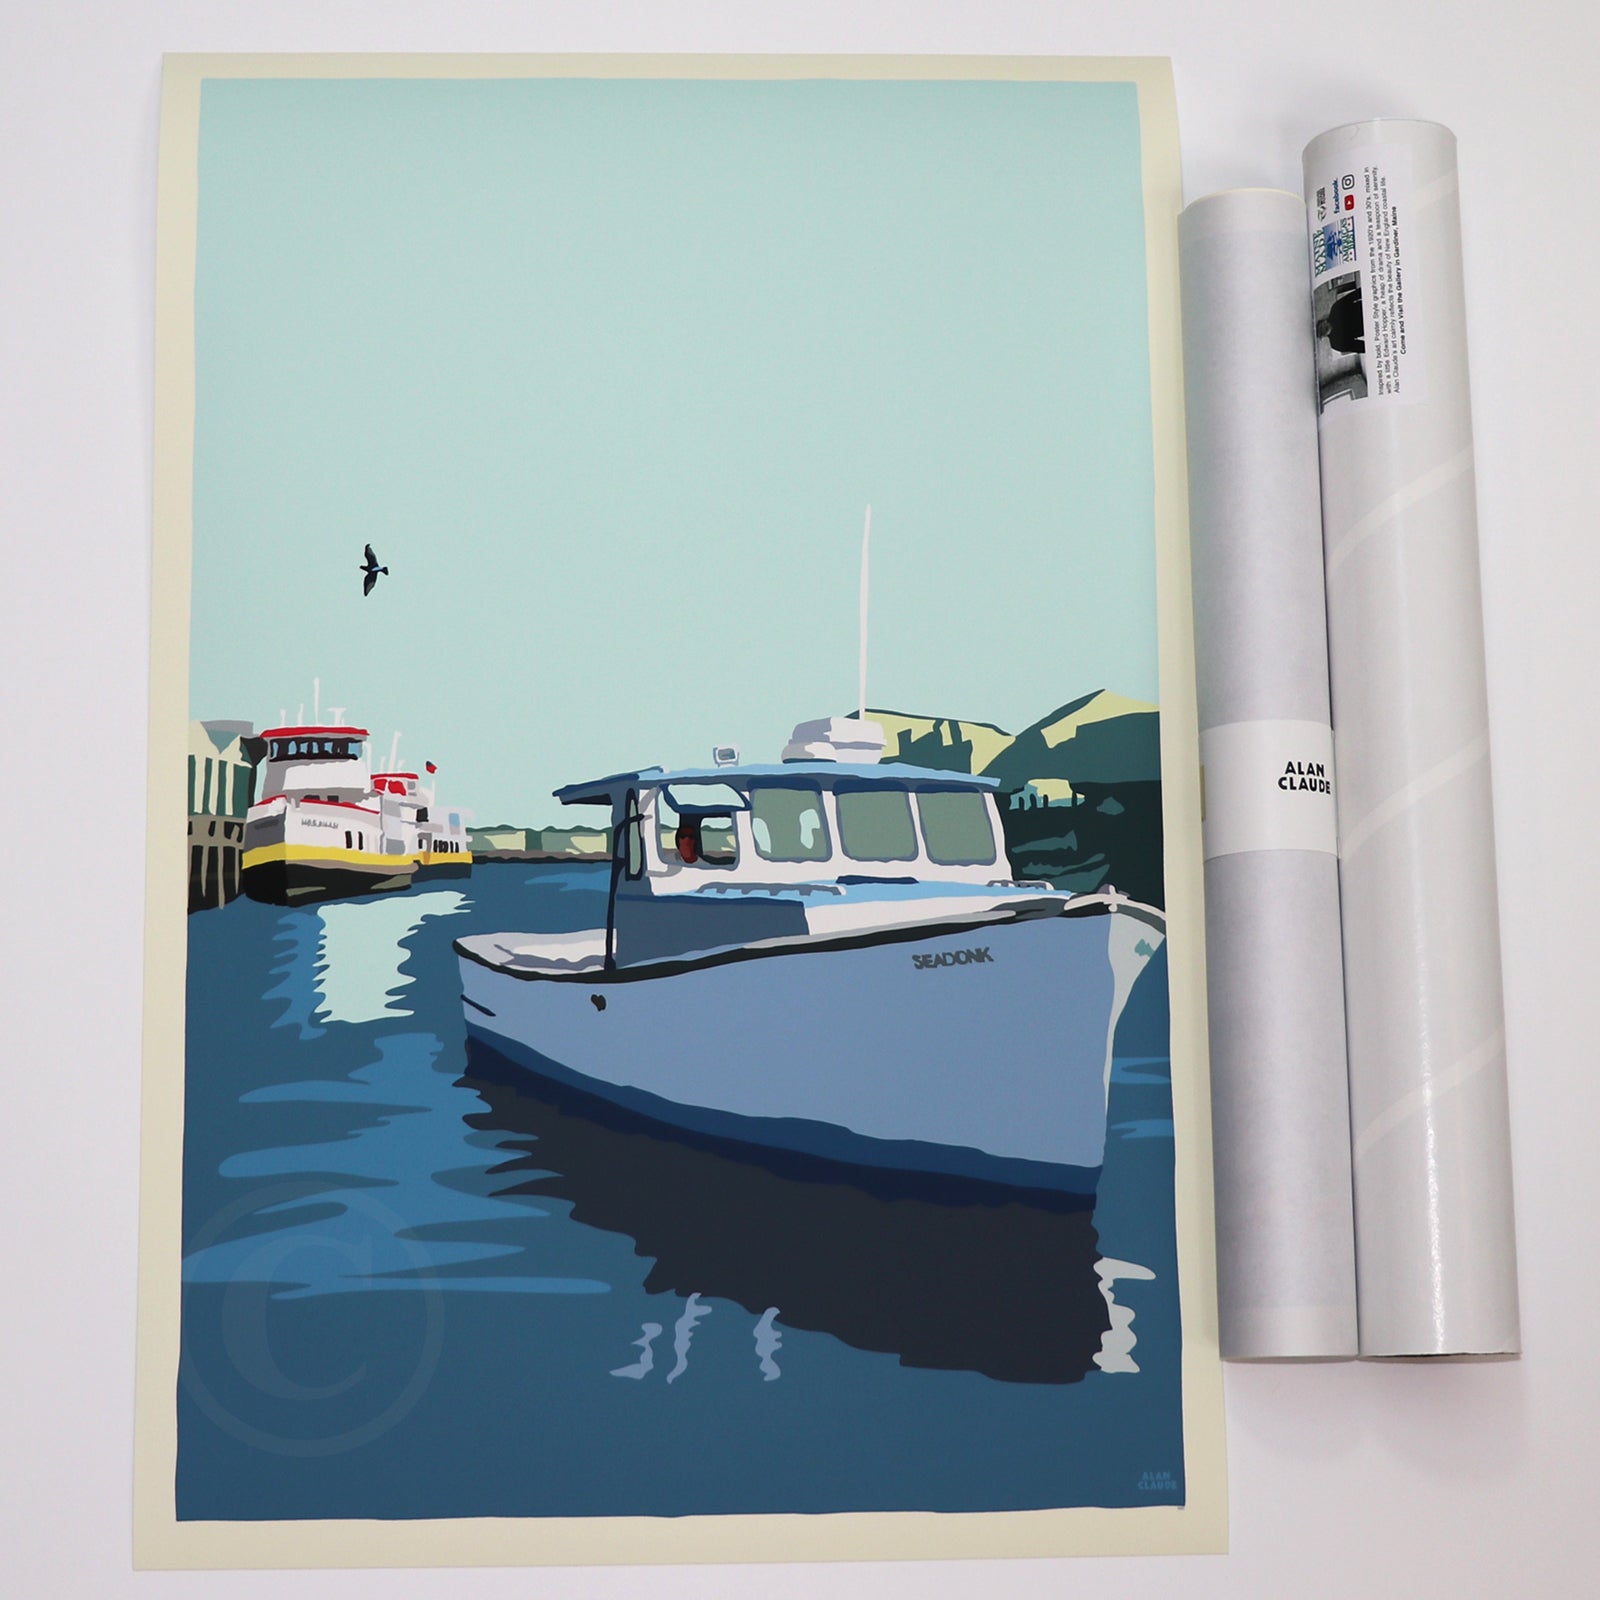 Coming Home Art Print 18" x 24" Wall Poster By Alan Claude - Portland, Maine